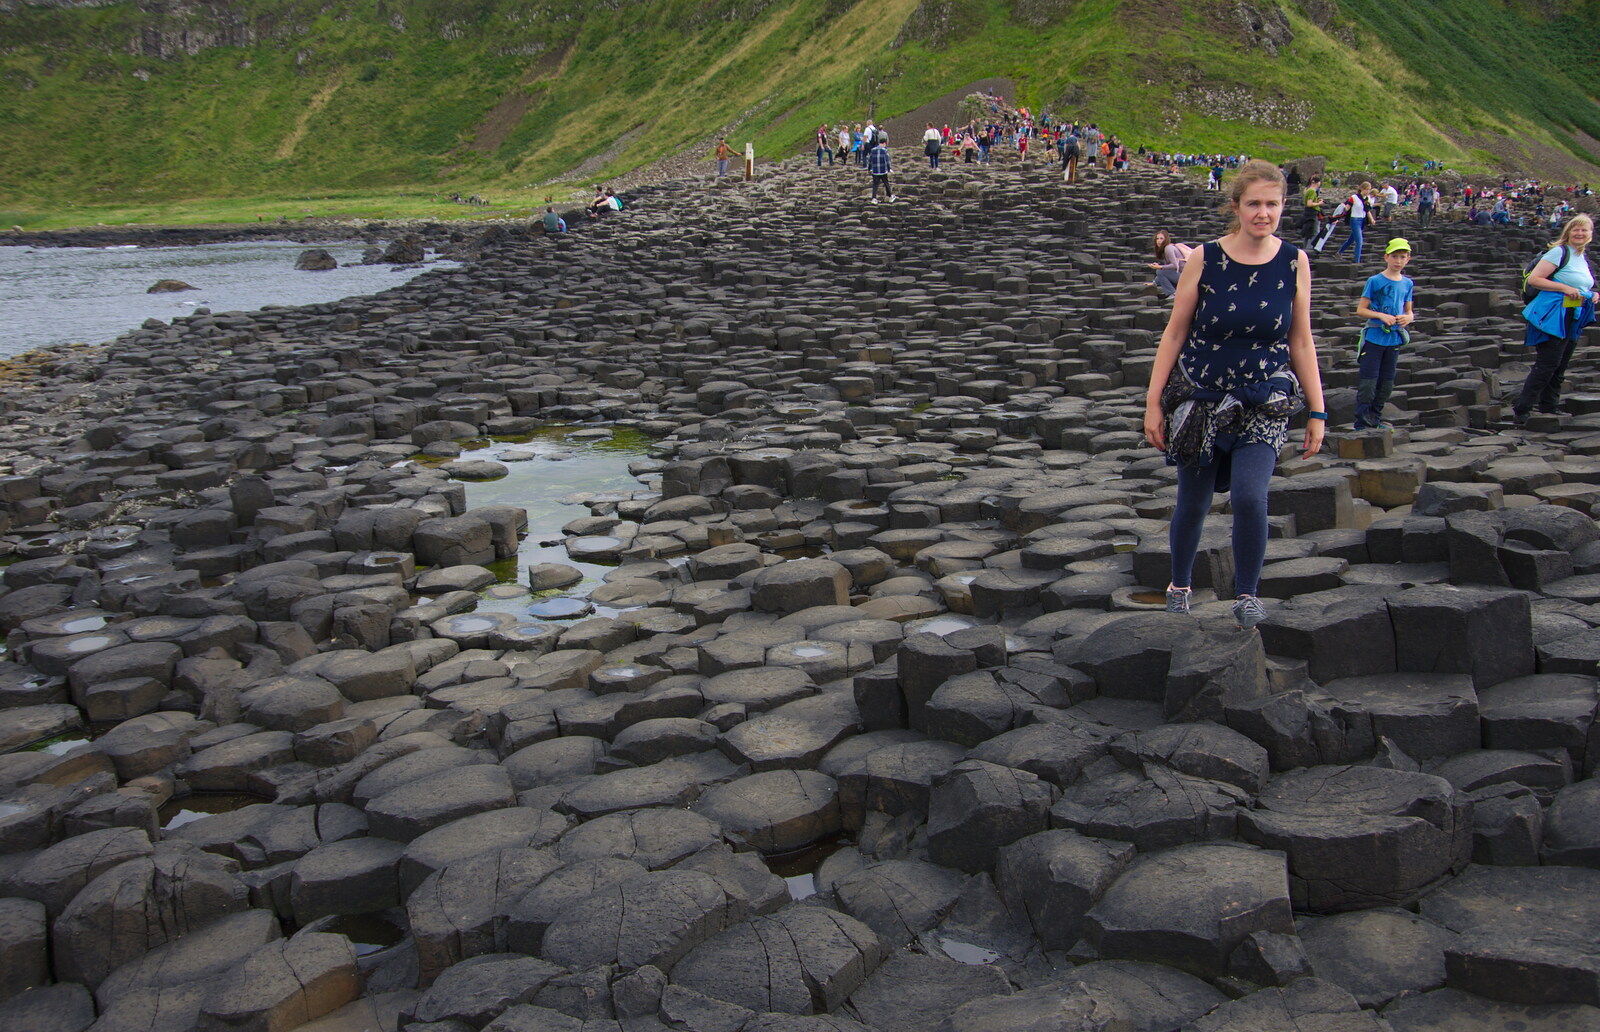 Isobel strides around from The Giant's Causeway, Bushmills, County Antrim, Northern Ireland - 14th August 2019